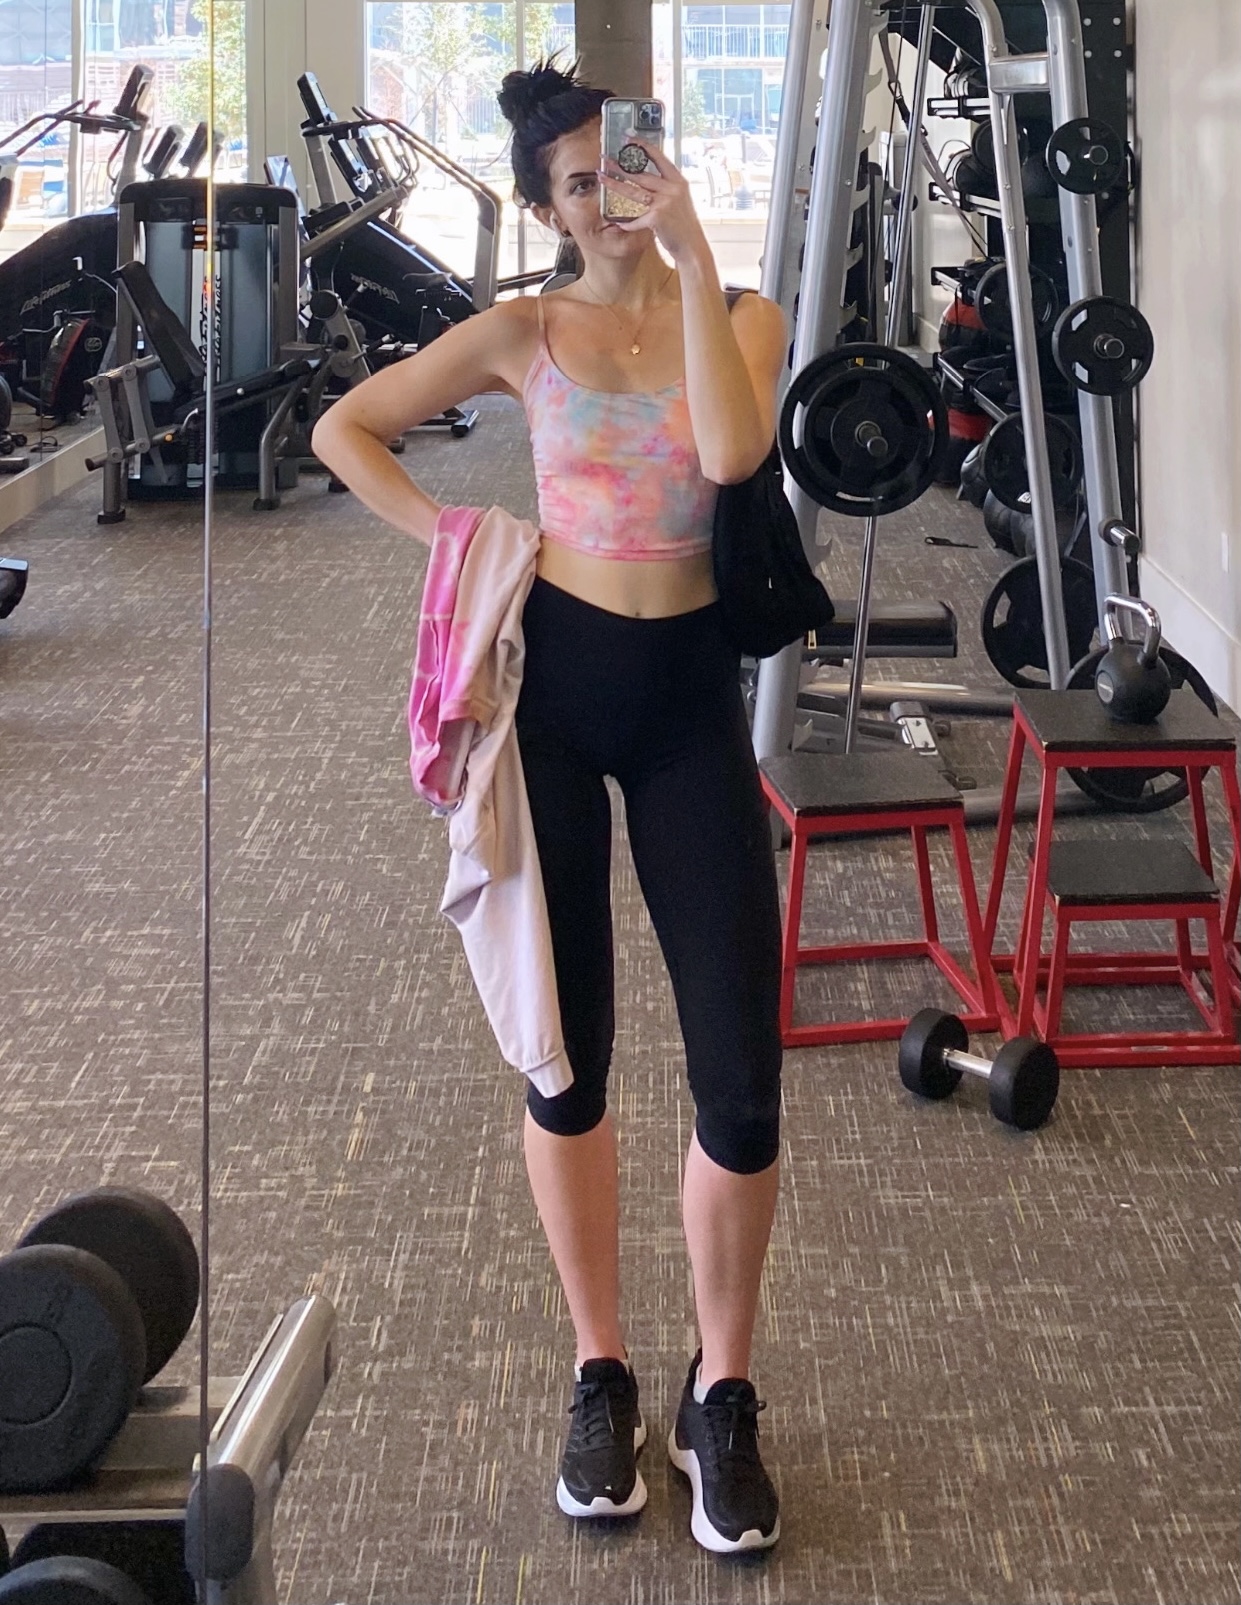 Image of Maddie standing in a gym